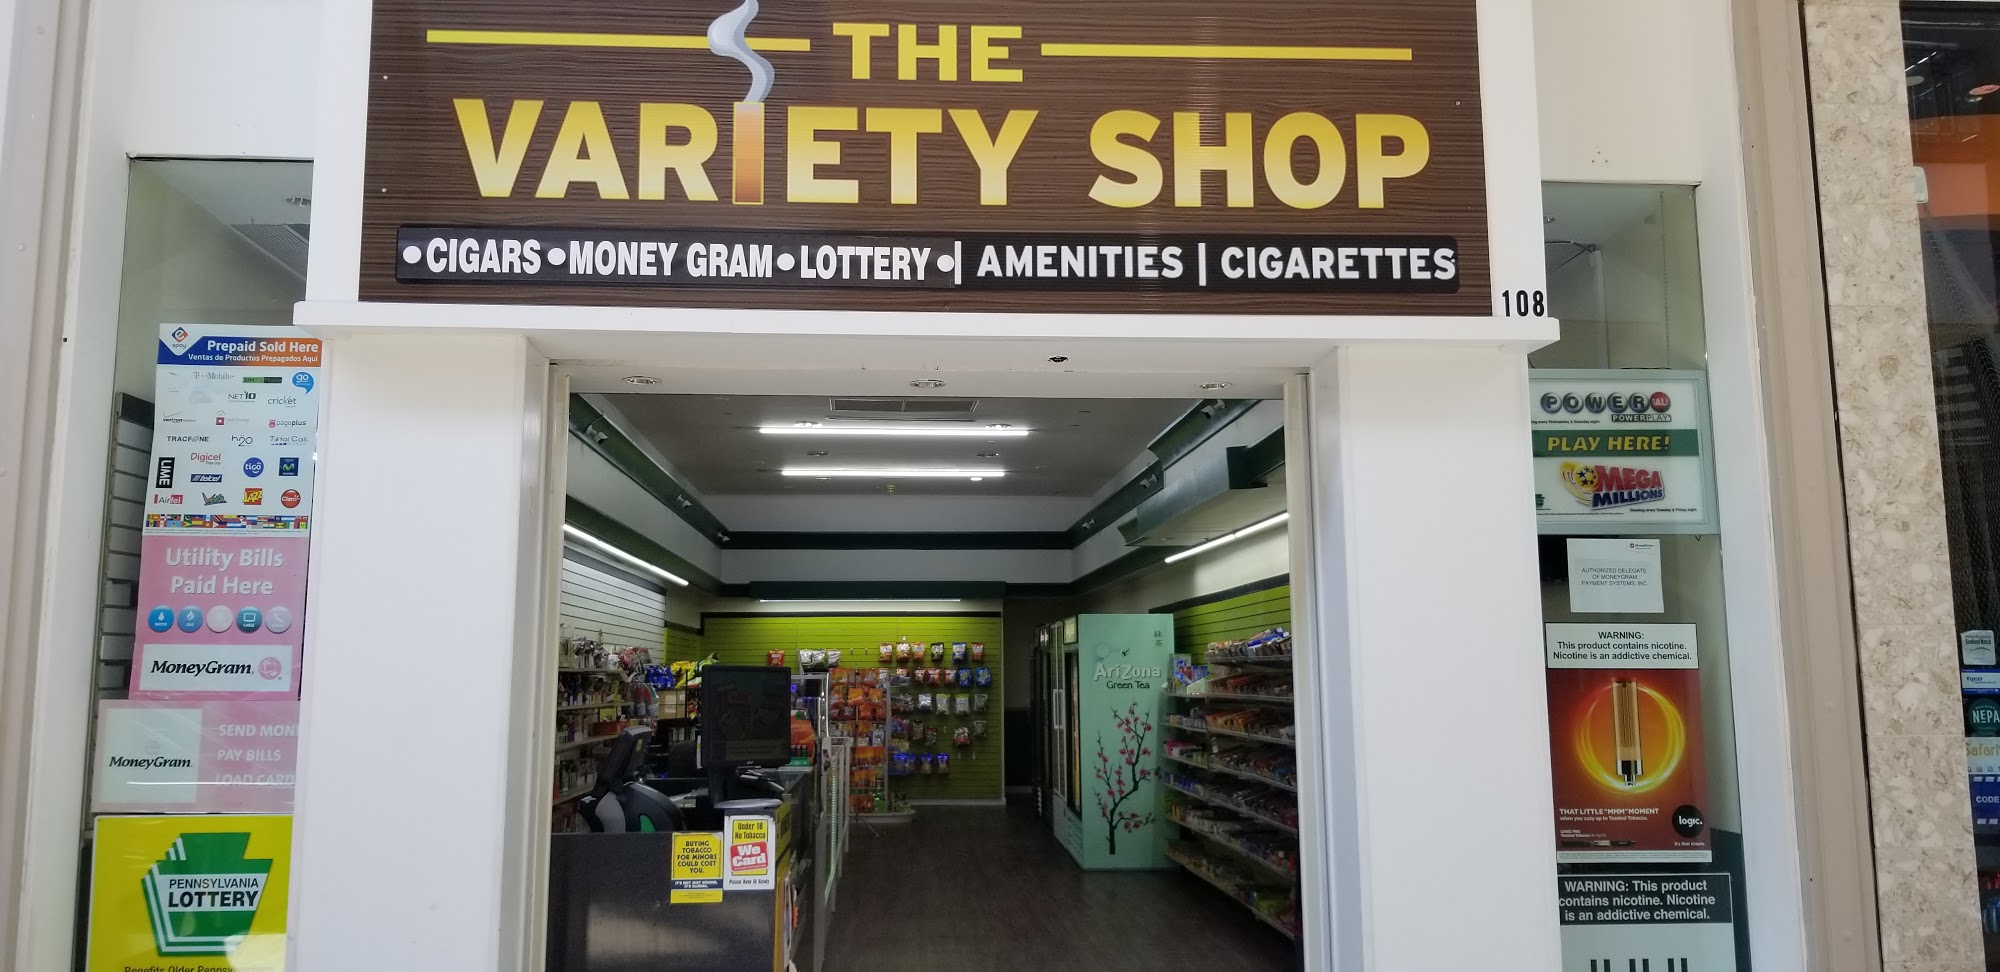 The Variety Shop